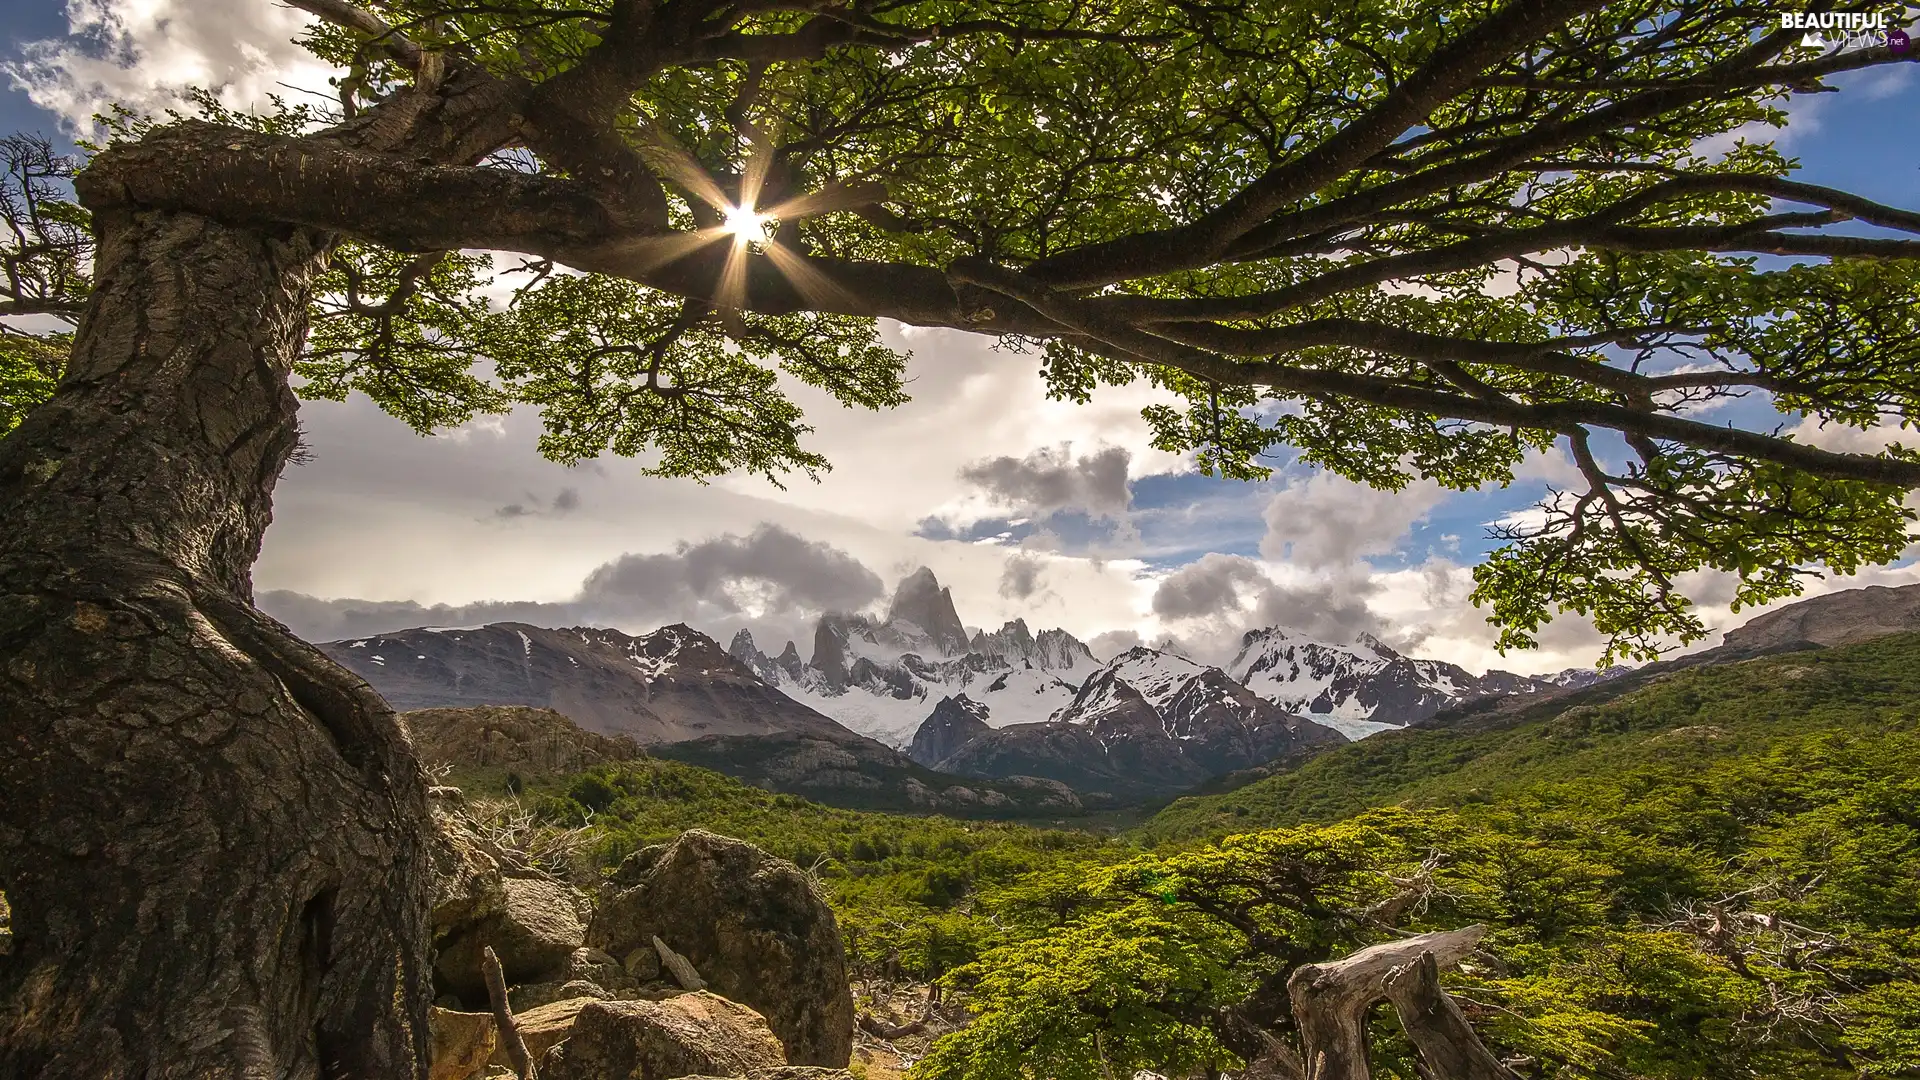 Mountains, Patagonia, Andy, rays of the Sun, Fitz Roy Mountain, Argentina, Los Glaciares National Park, clouds, trees, El Chalten